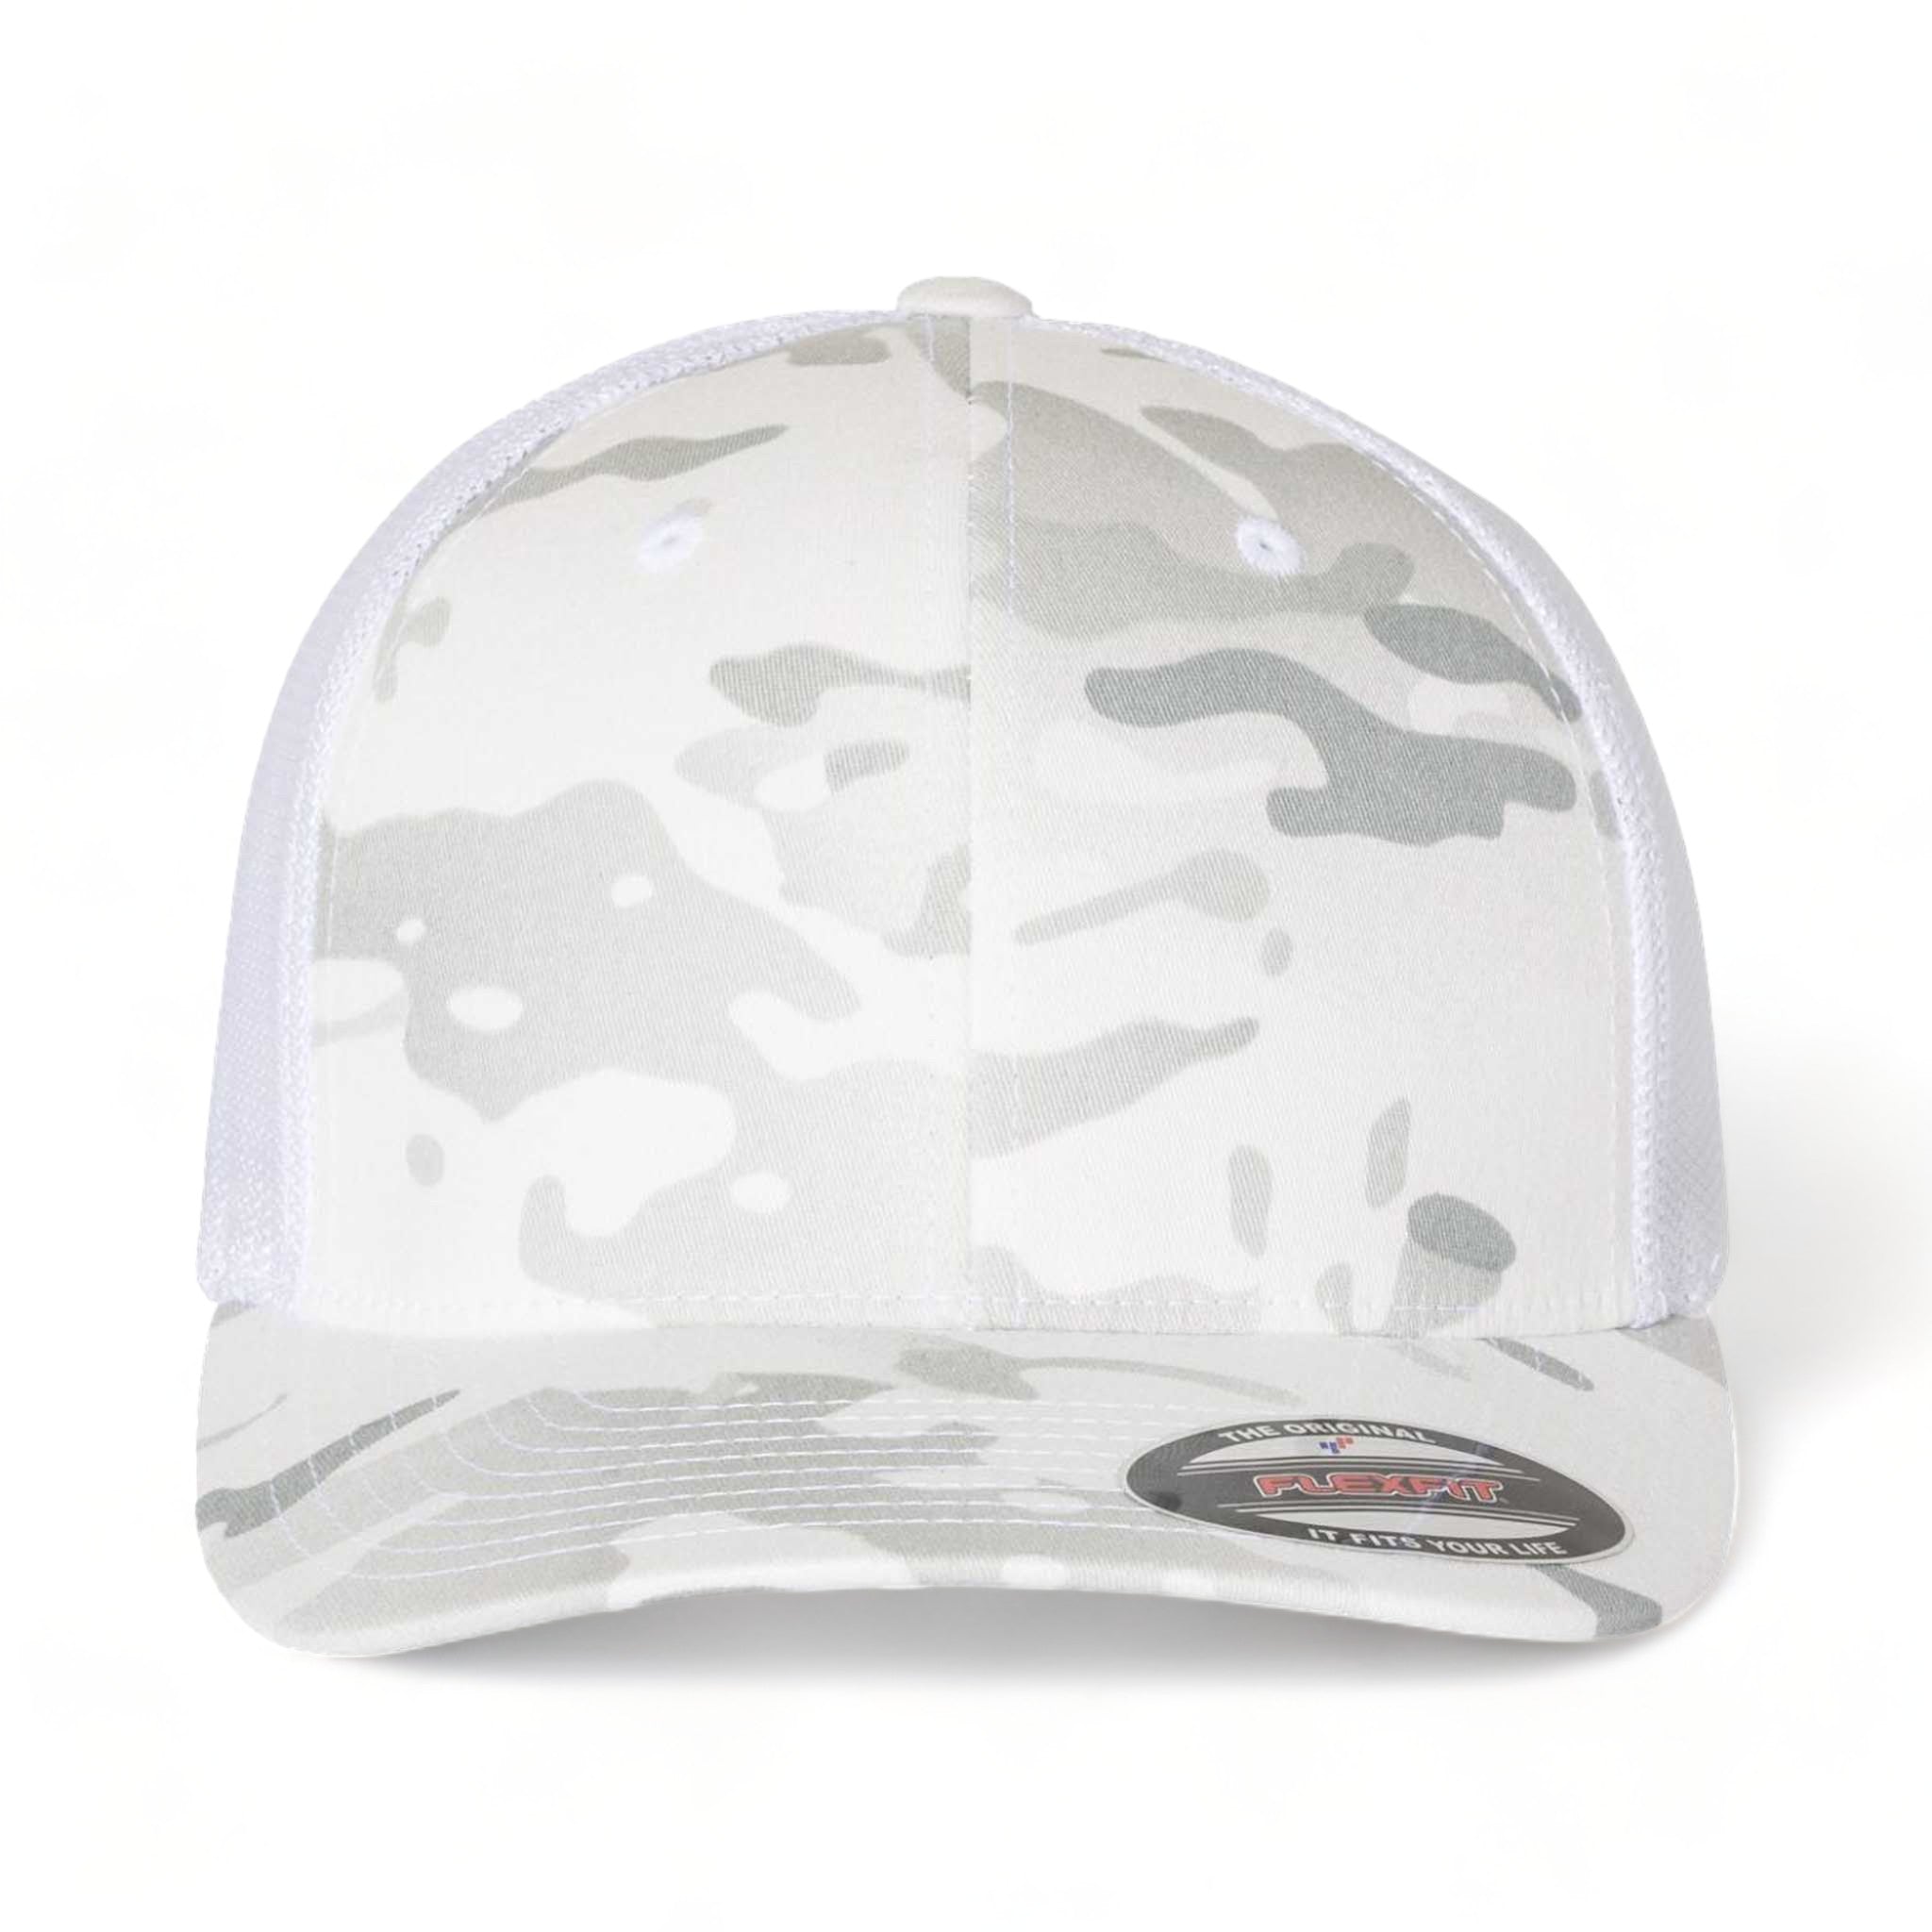 Front view of Flexfit 6511 custom hat in multicam alpine and white